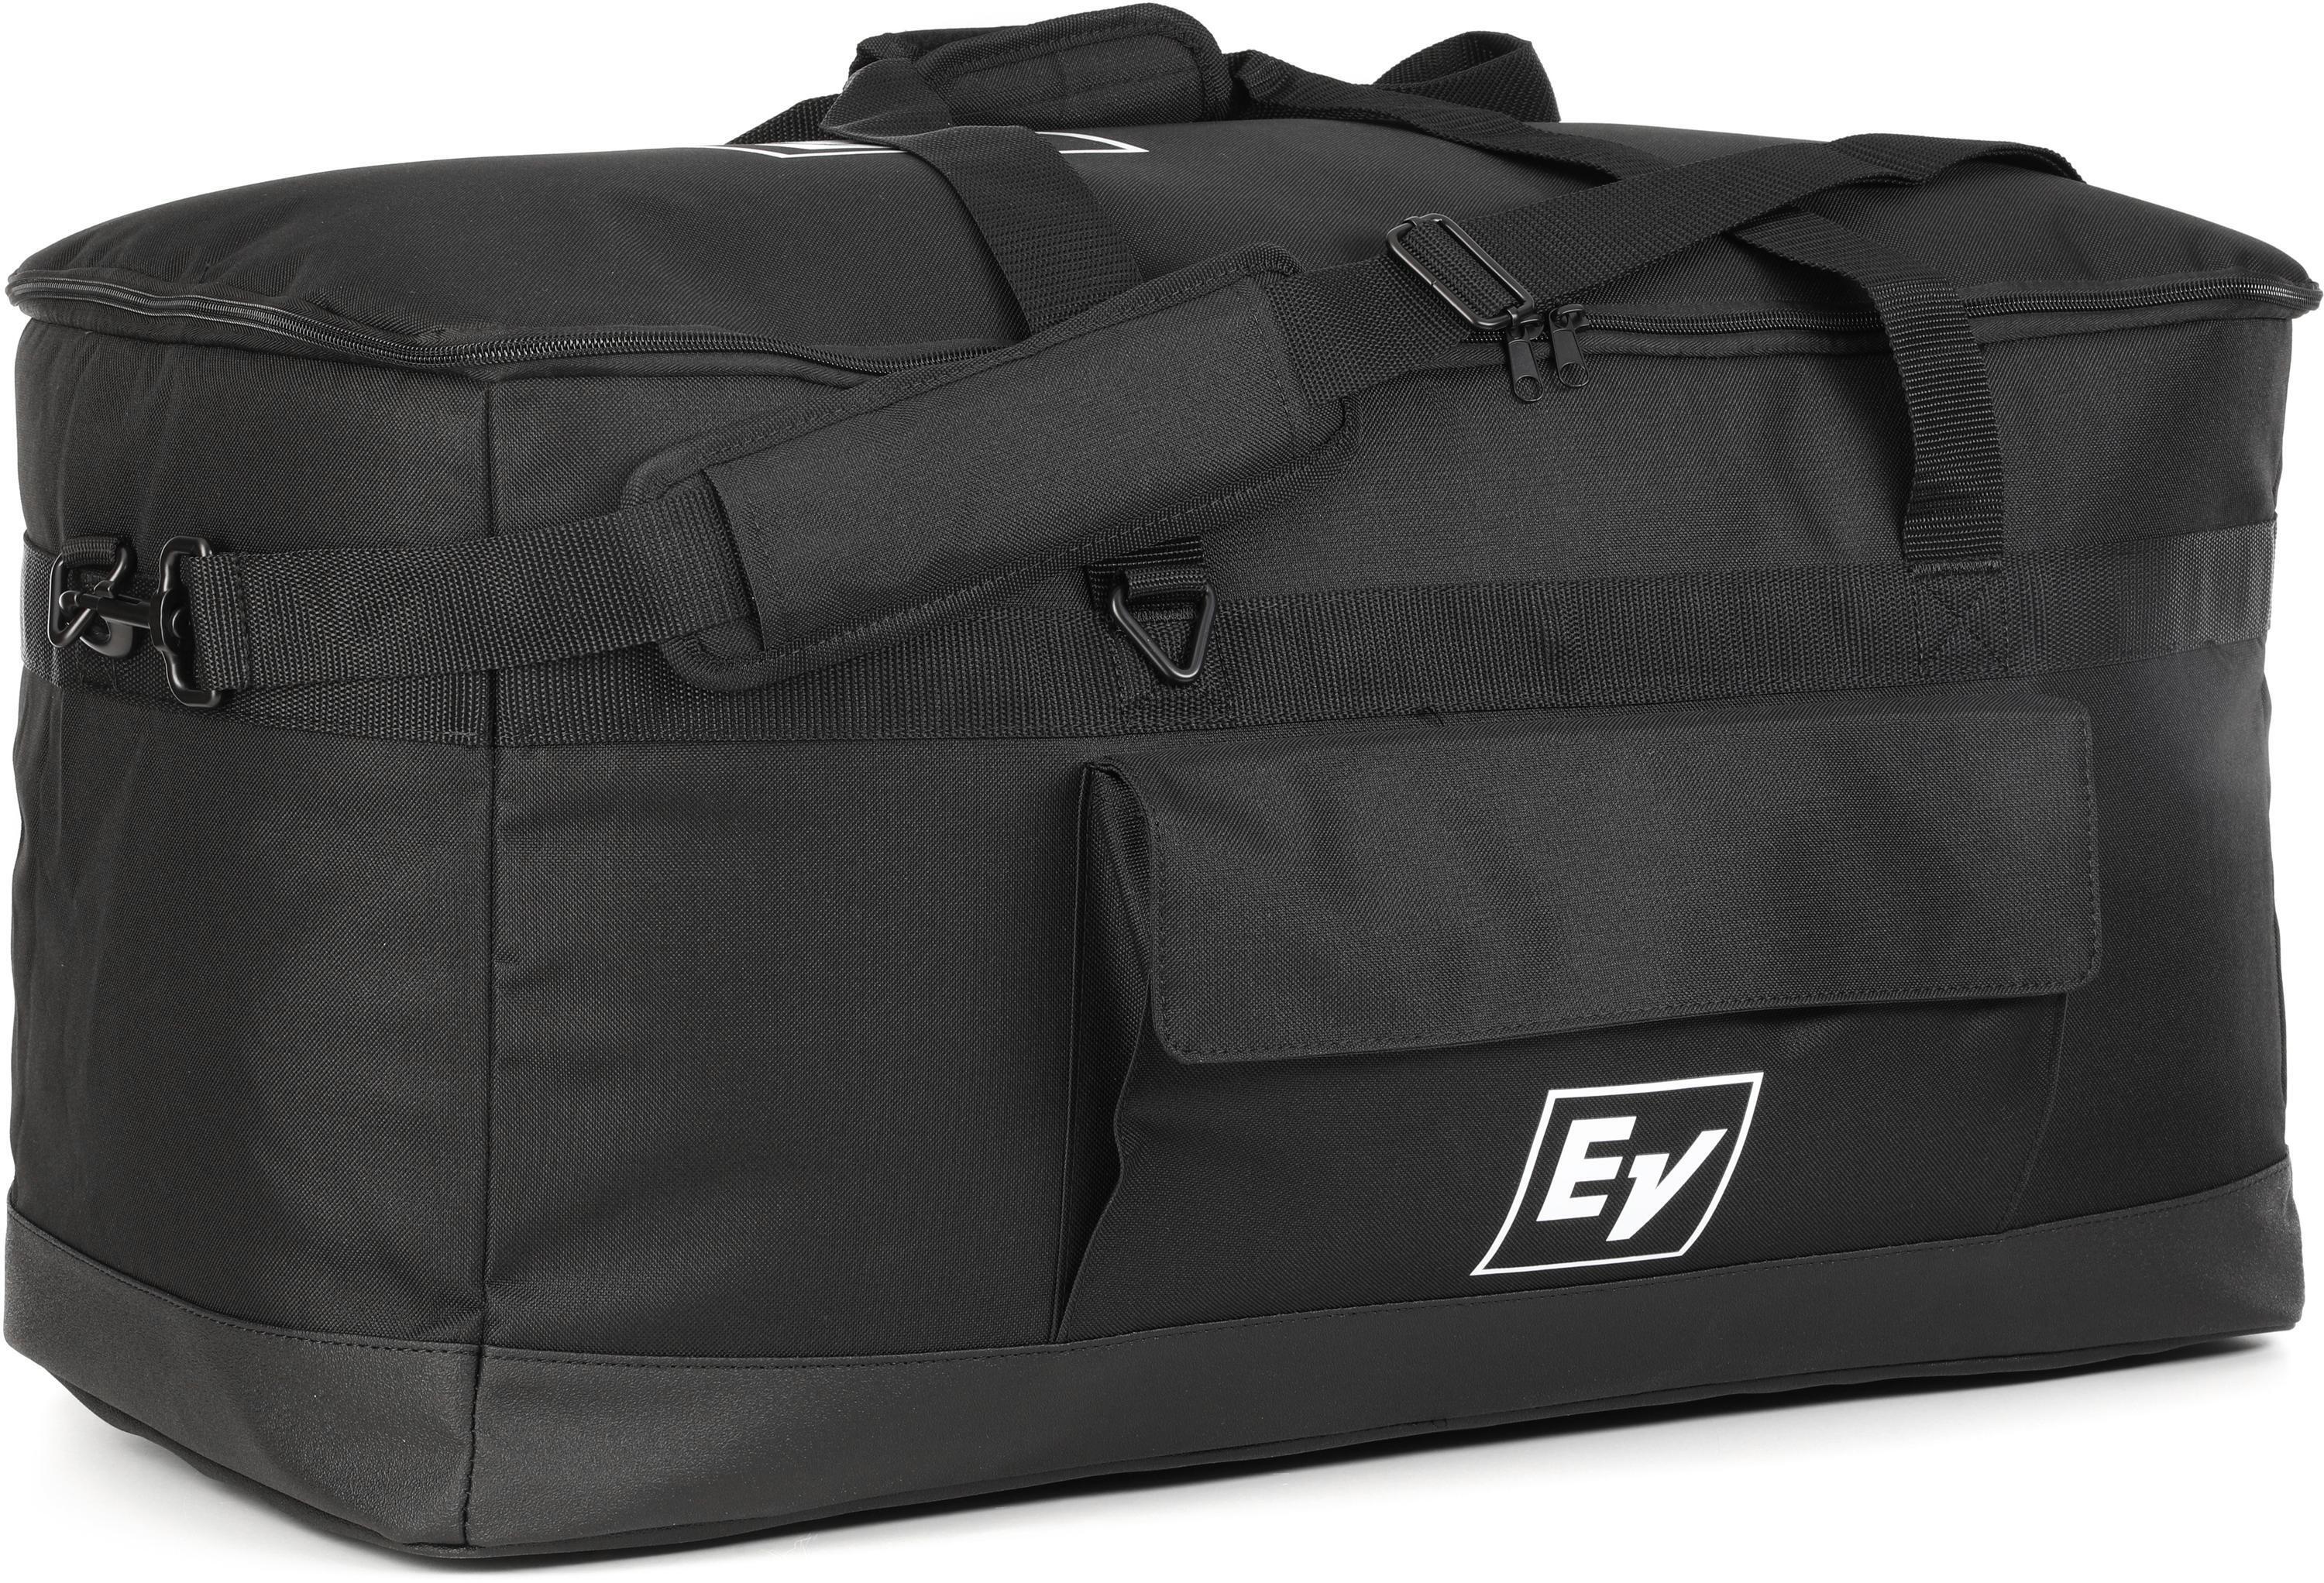 Electro-Voice Everse 8 Padded Tote Bag | eBay